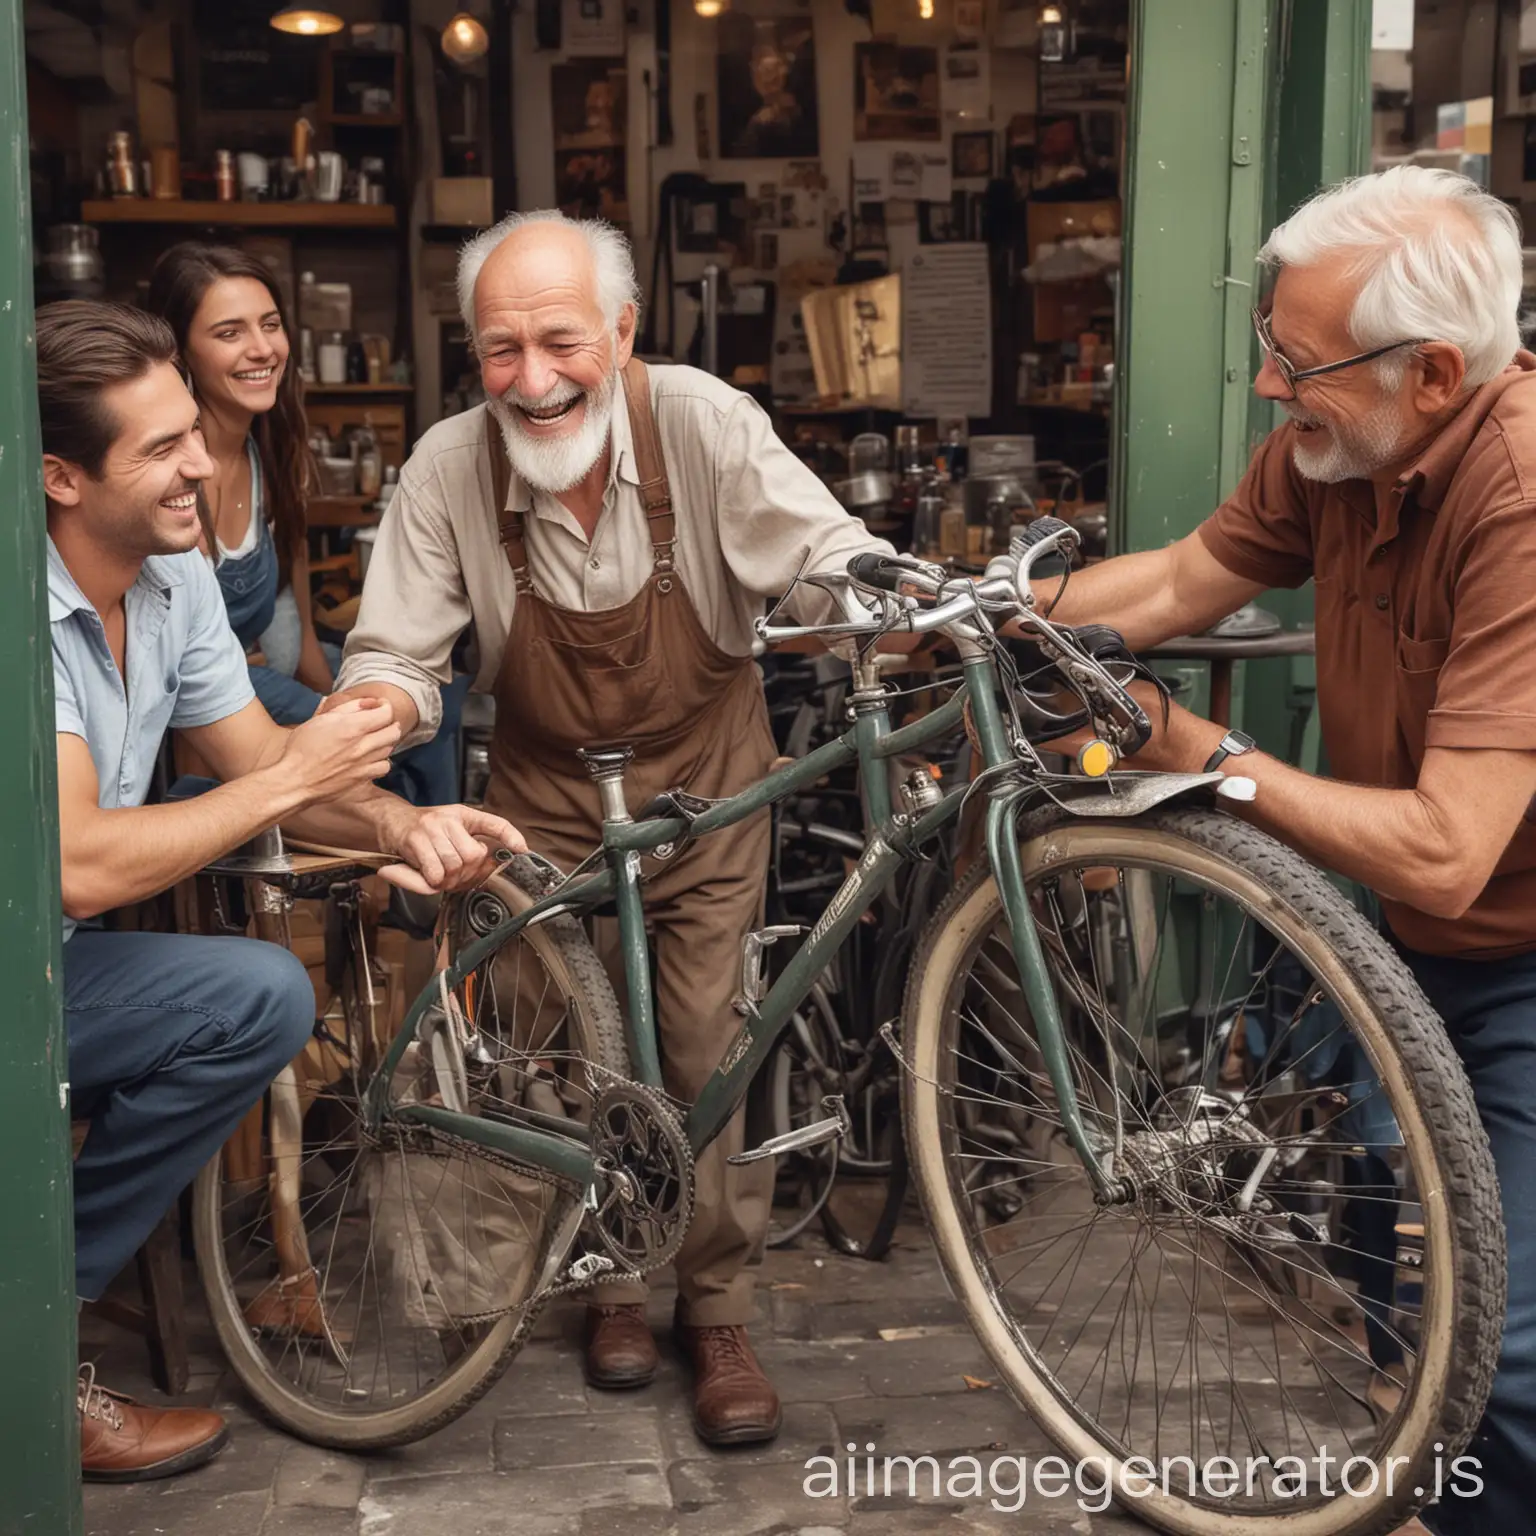 picture in vertical orientation of an old man repairing a bicycle in a coffee shop with friends and all are laughing